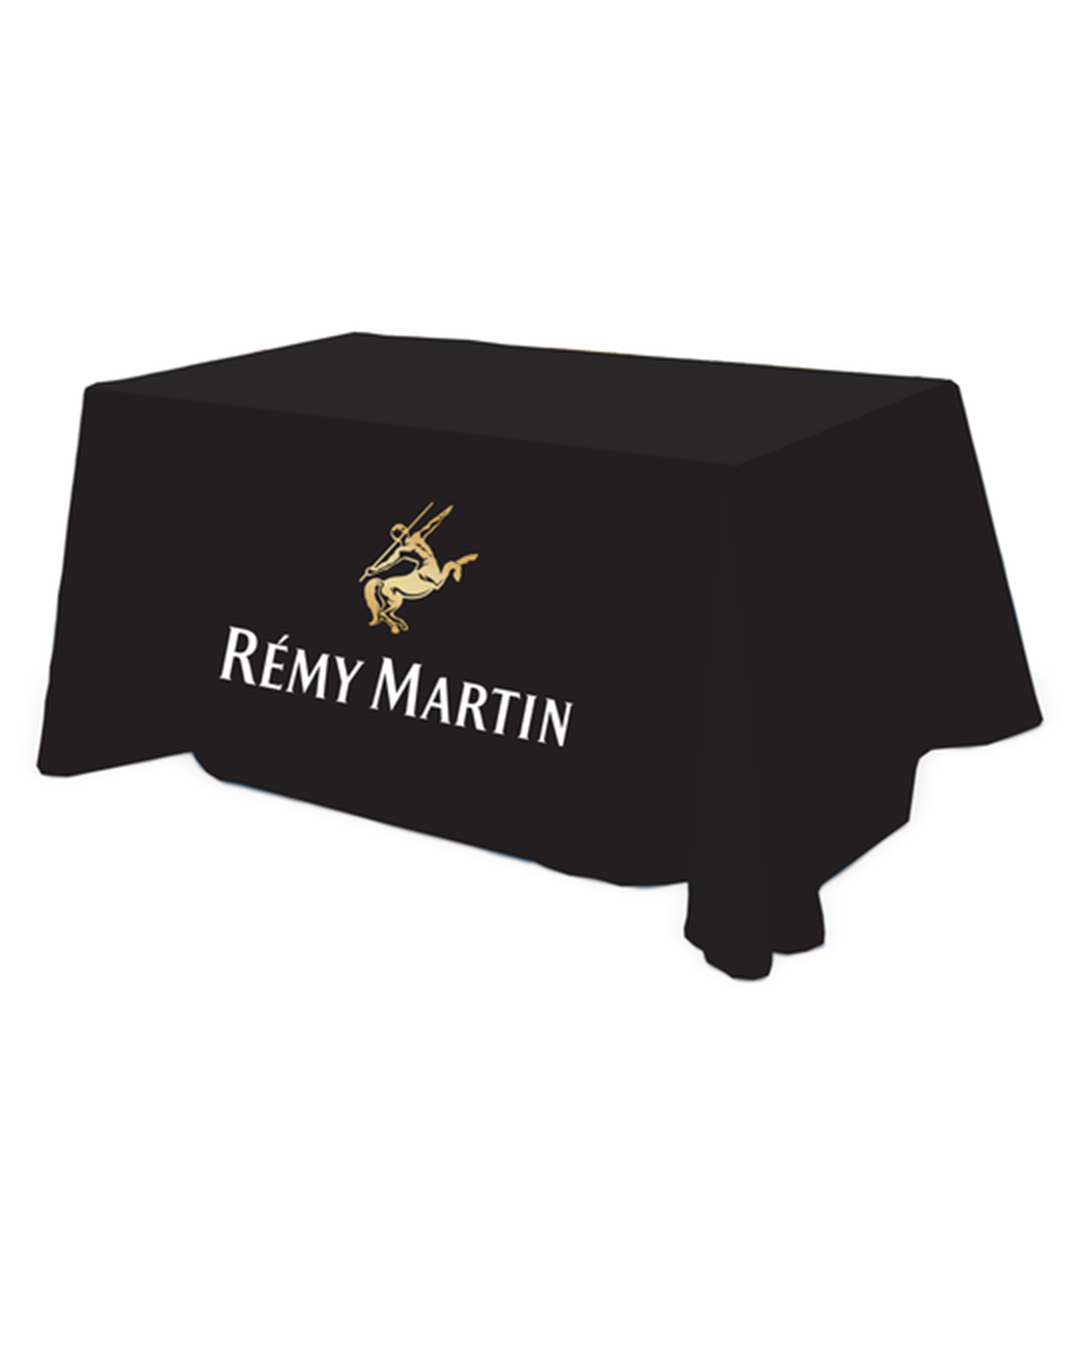 Remy Martin Table Cloth Cover